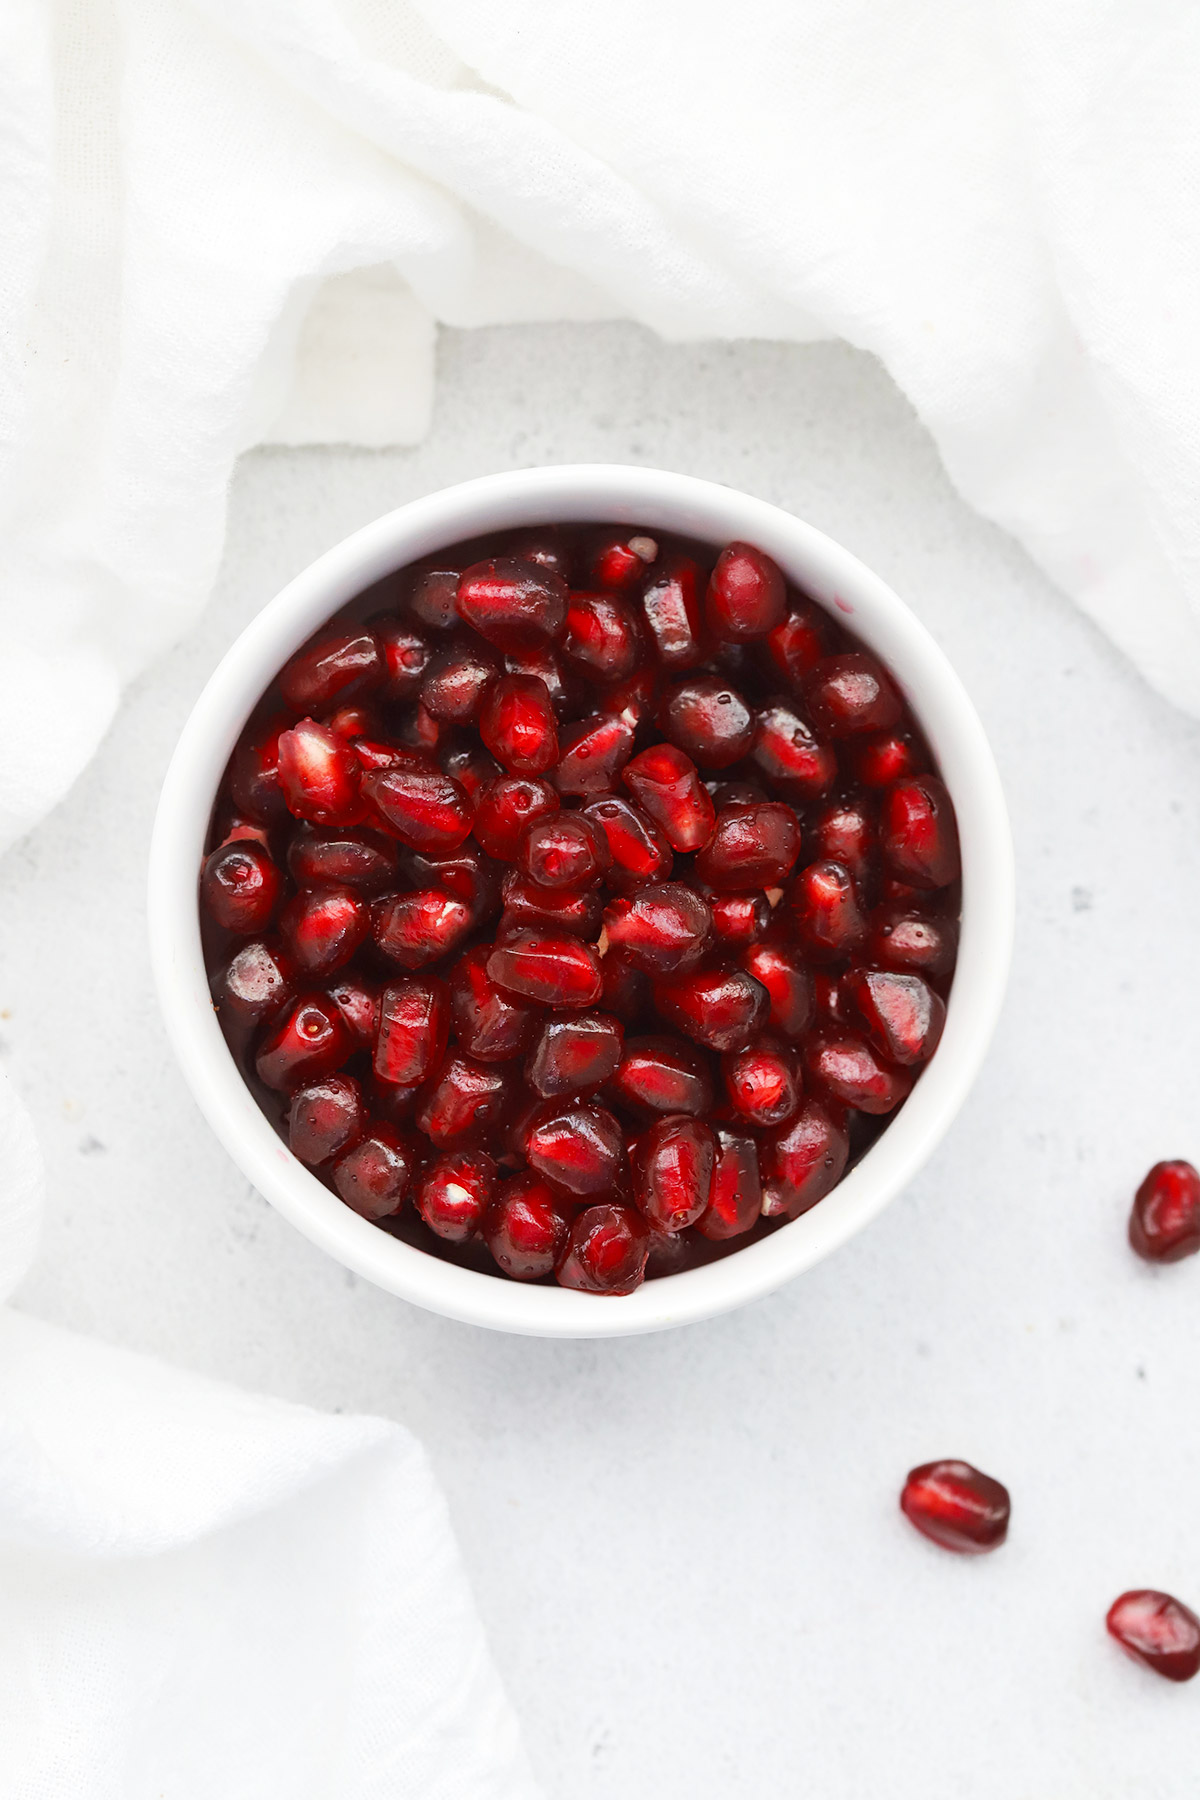 Overhead view of pomegranate seeds in a white bowl on a white background